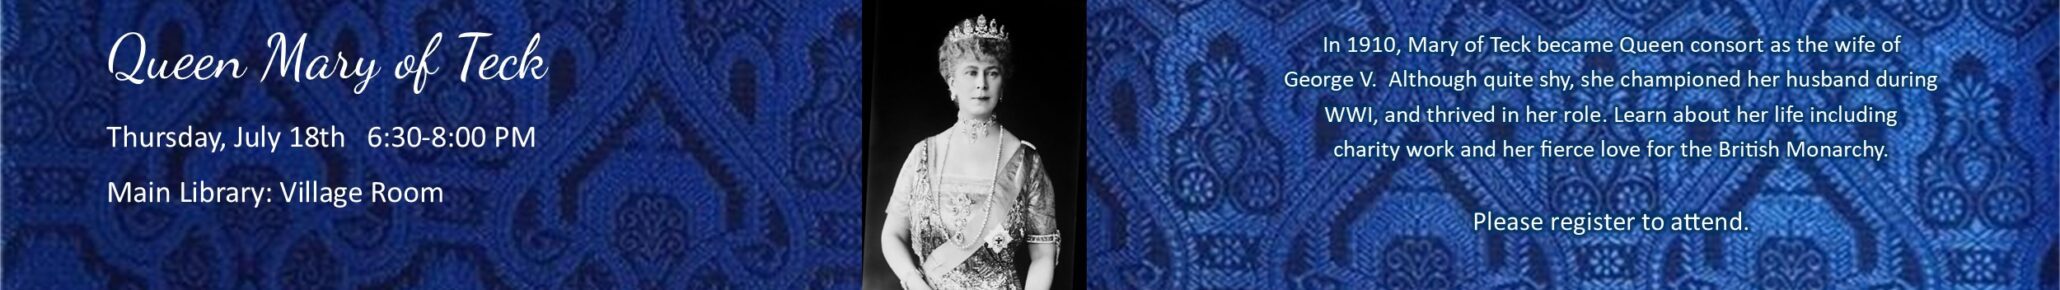 learn about Queen Mary of Teck at the main library on july 18